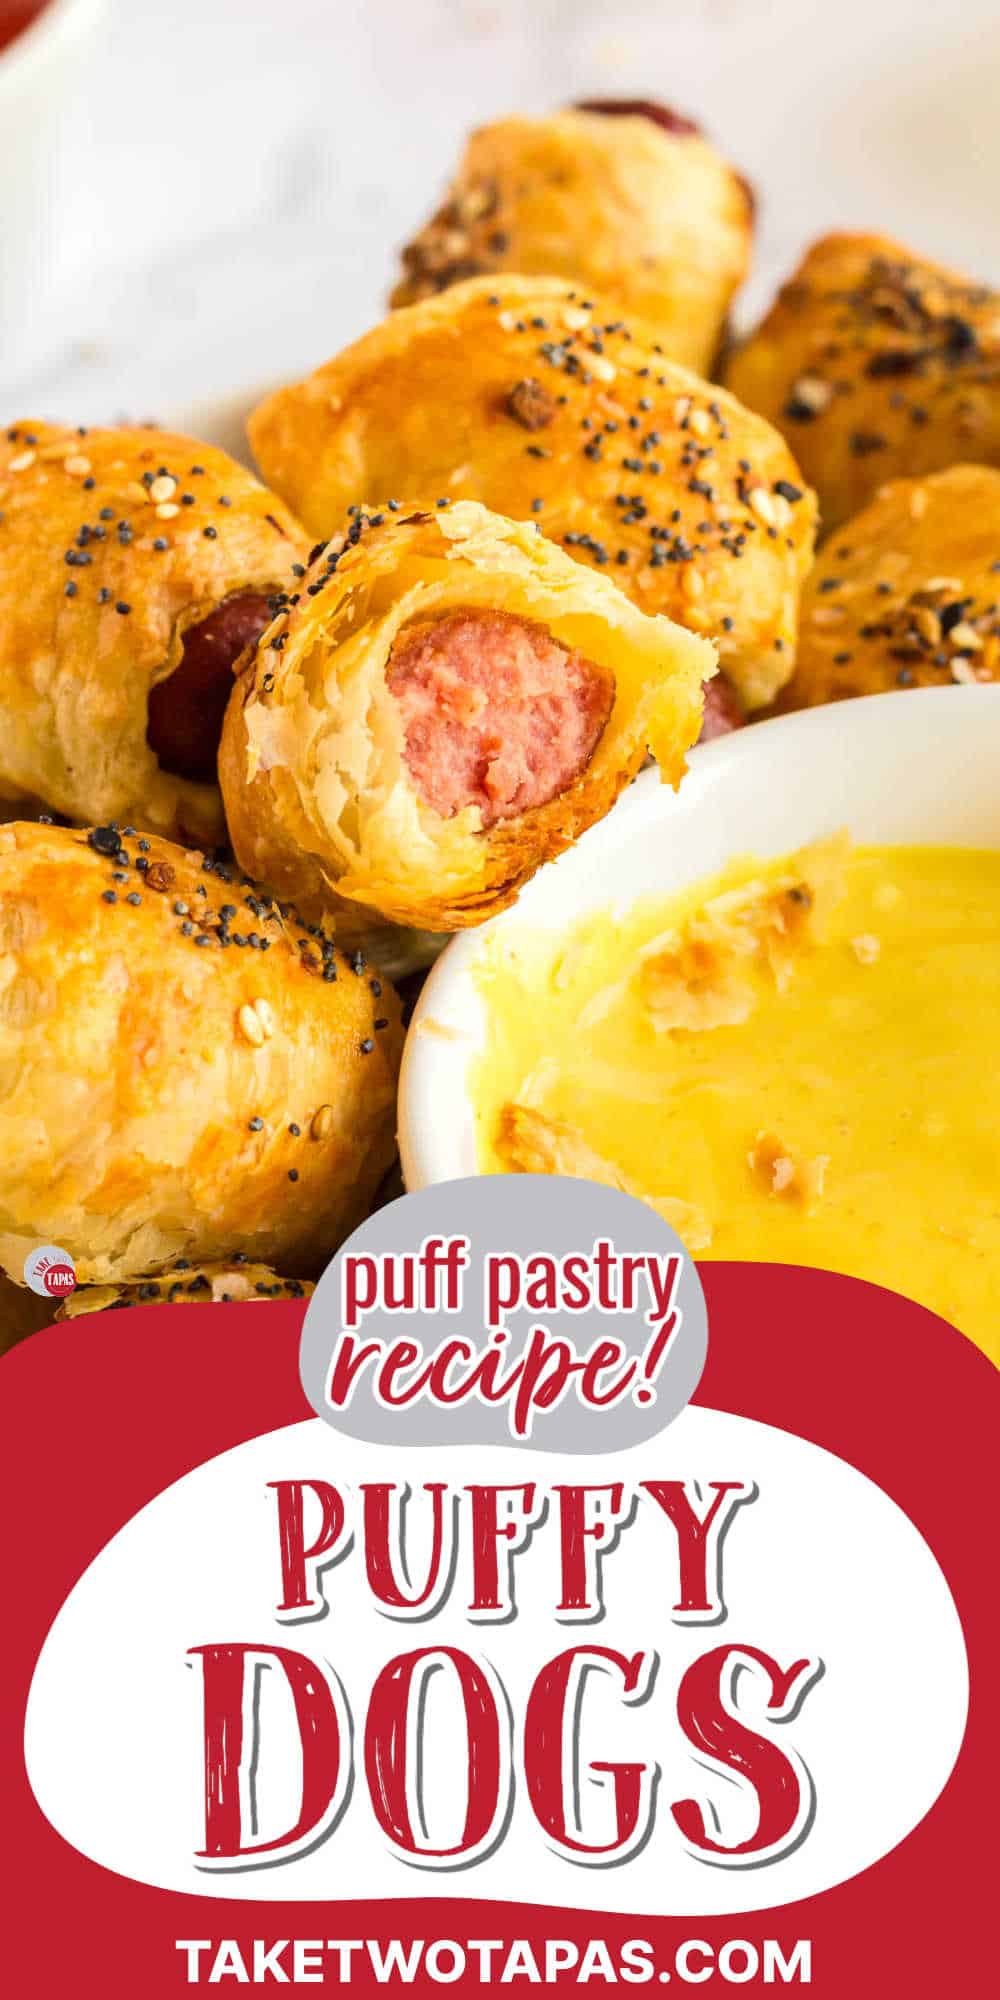 mini puff pastry dogs with text "puff pastry pigs in a blanket"